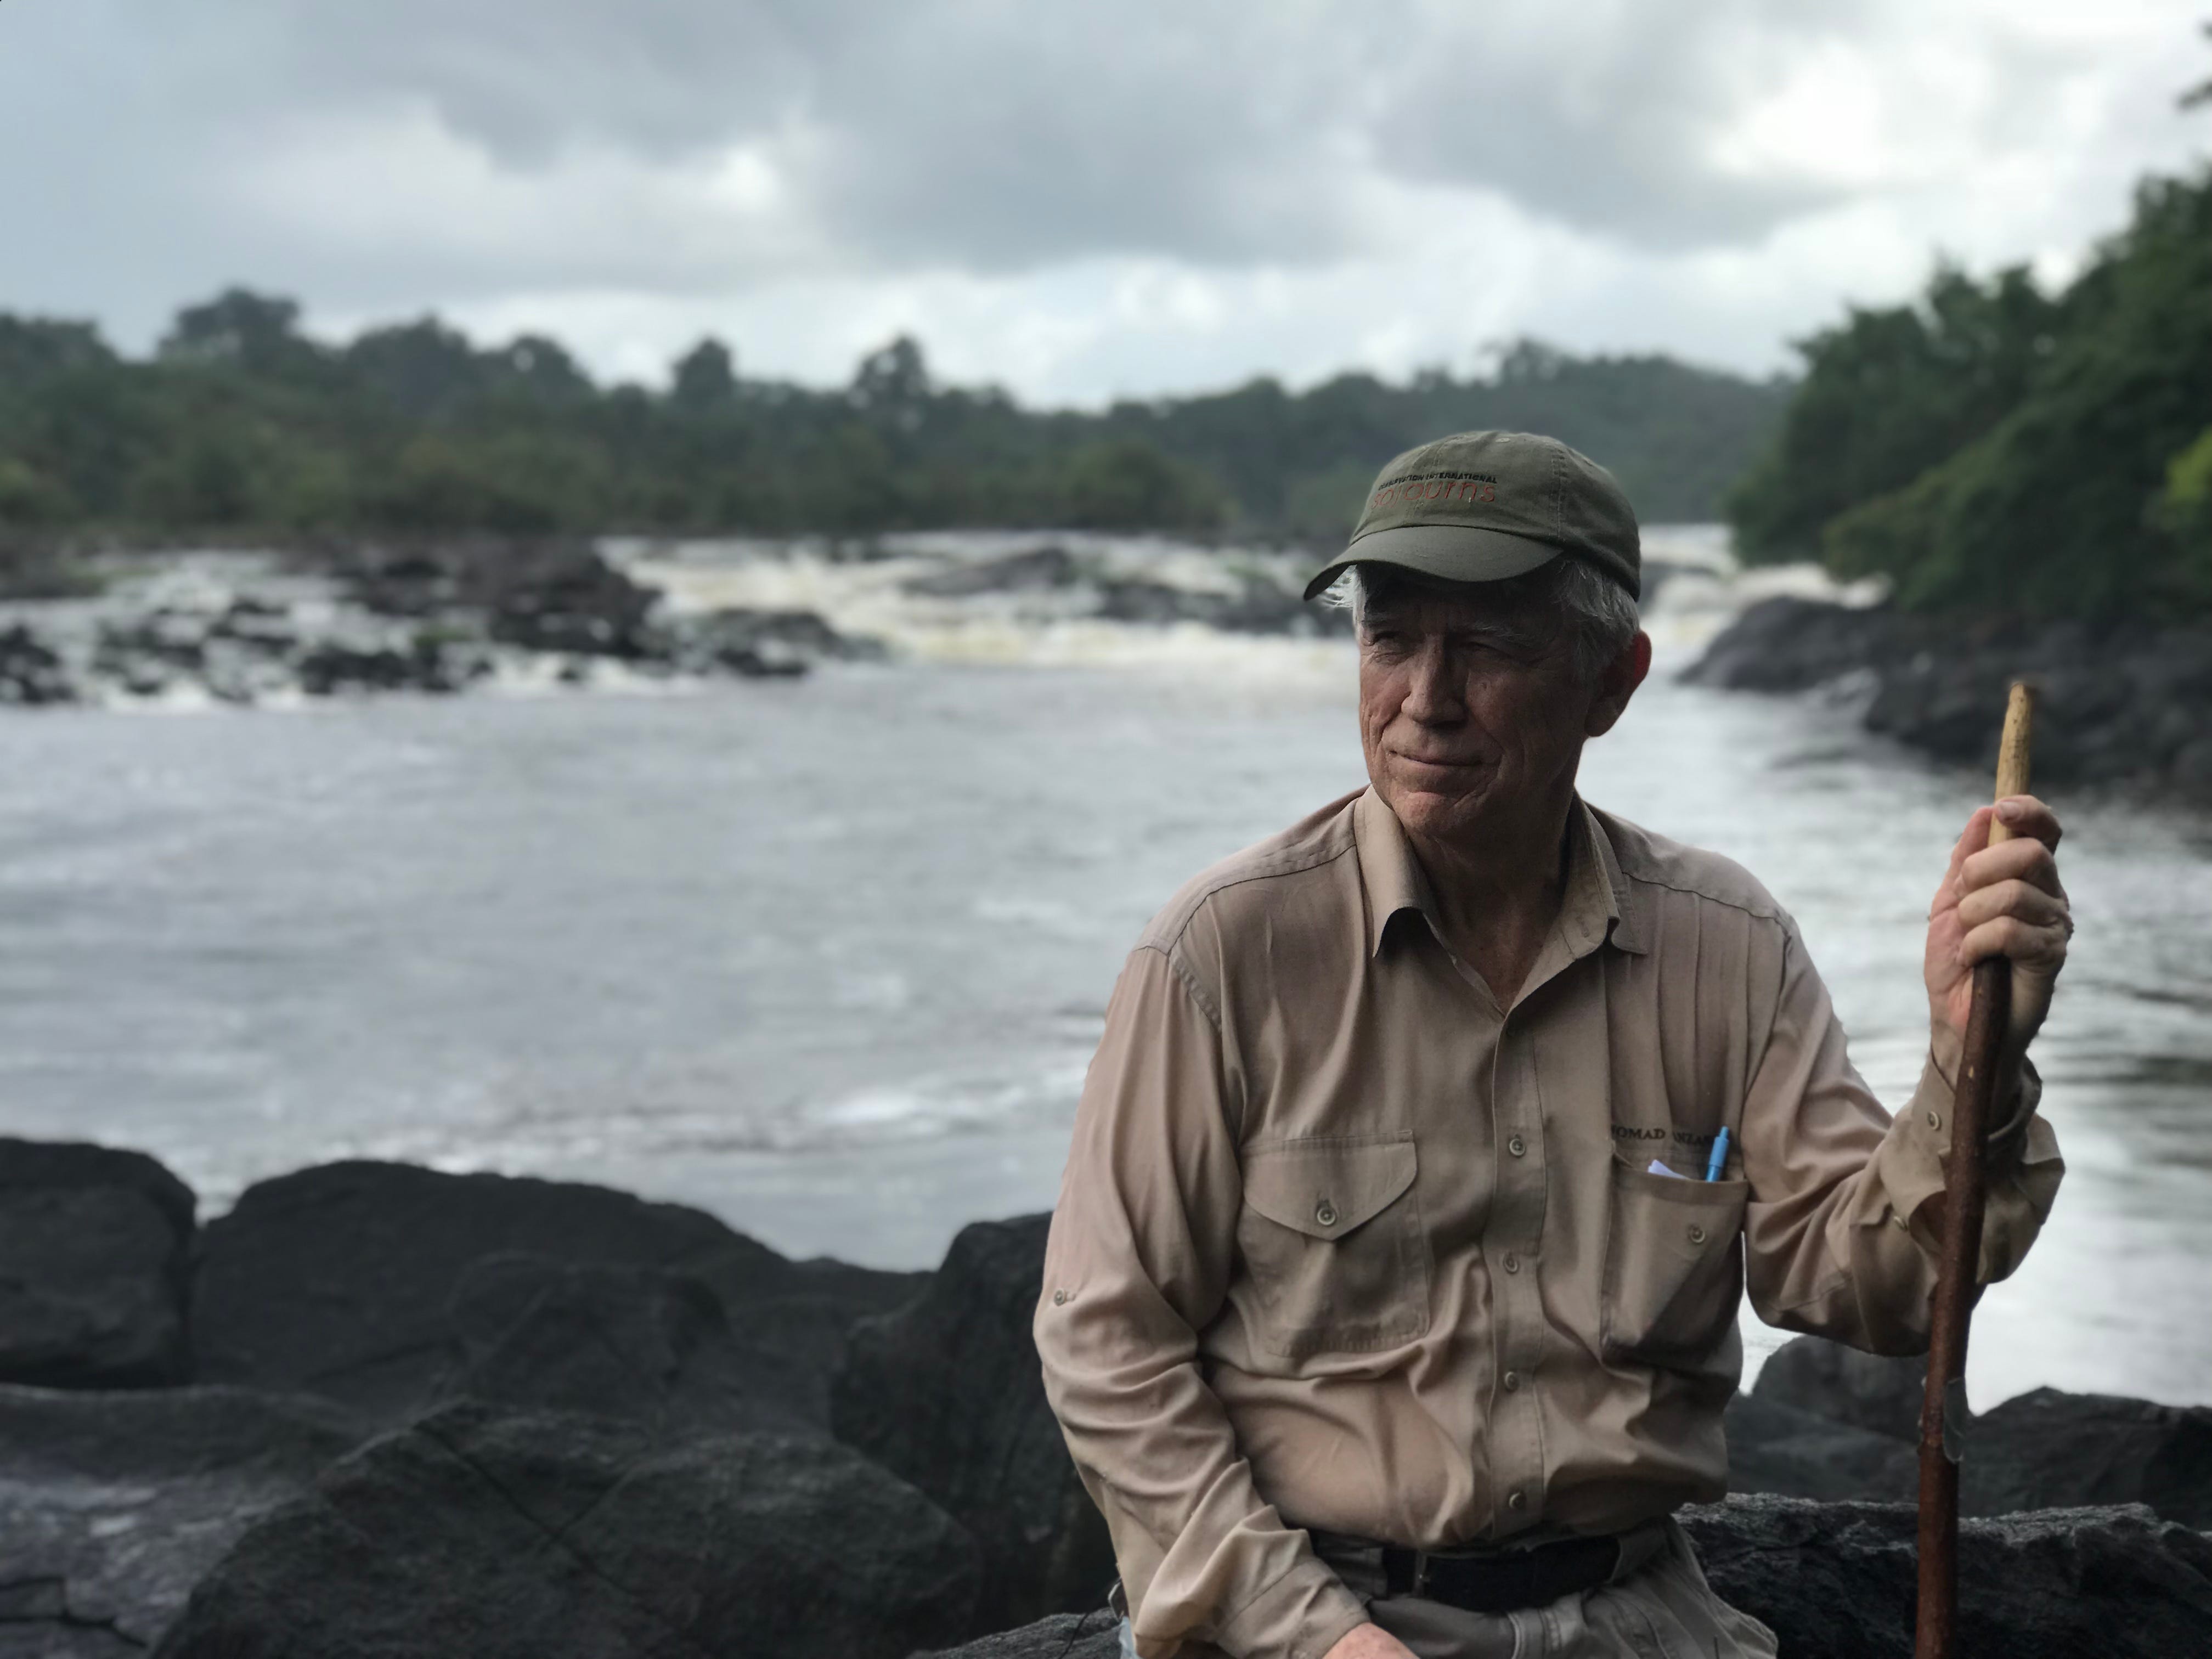 The 2018 Indianapolis Prize winner has discovered 18 species, meet Russ Mittermeier